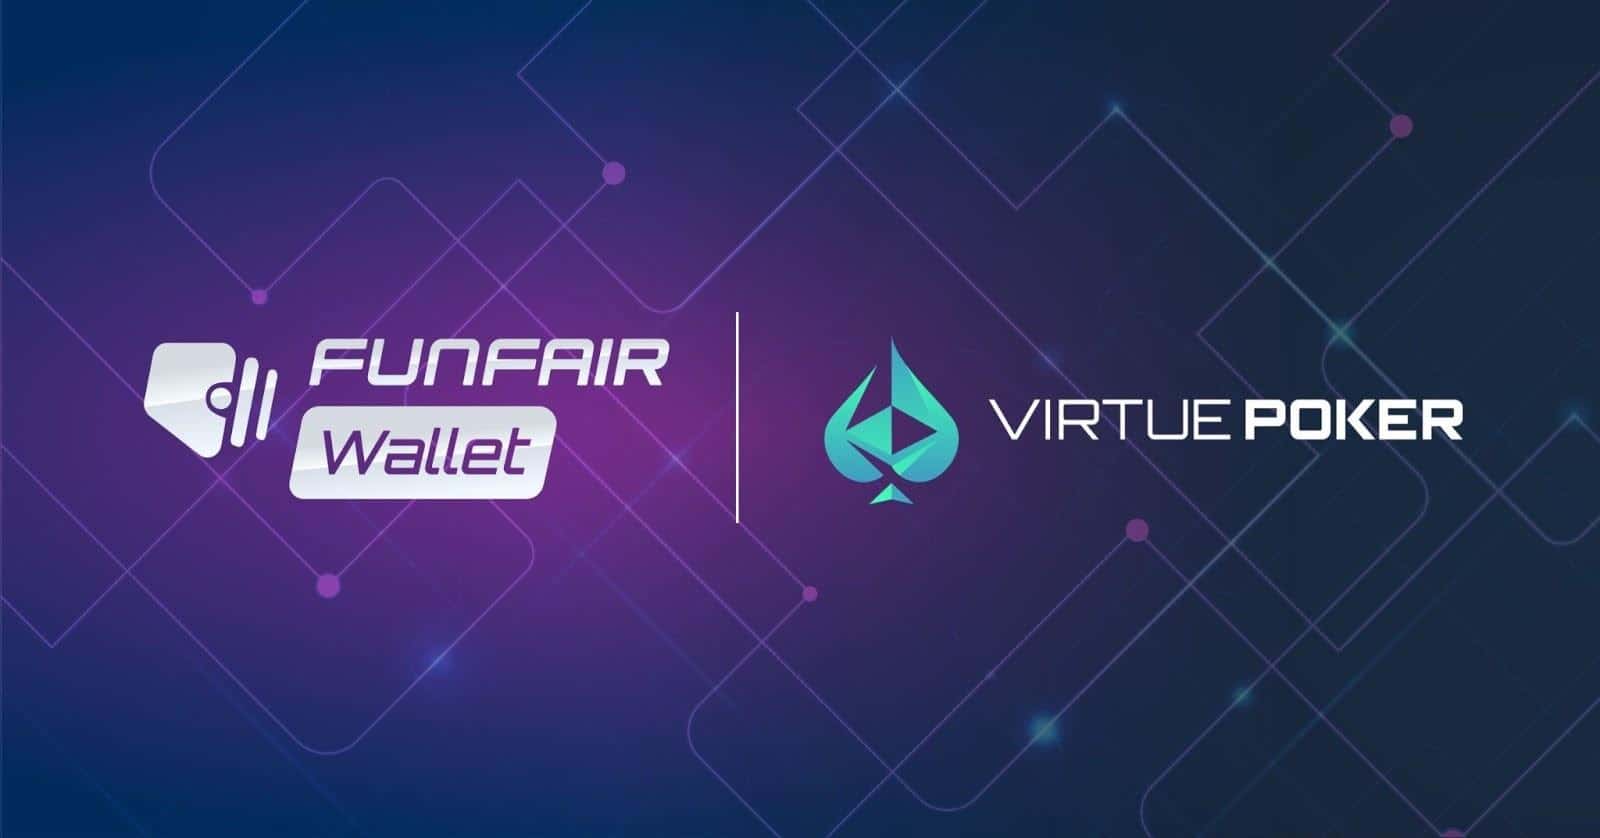 Virtue-poker-announces-integration-of-funfair-wallet-for-players-of-decentralized-poker